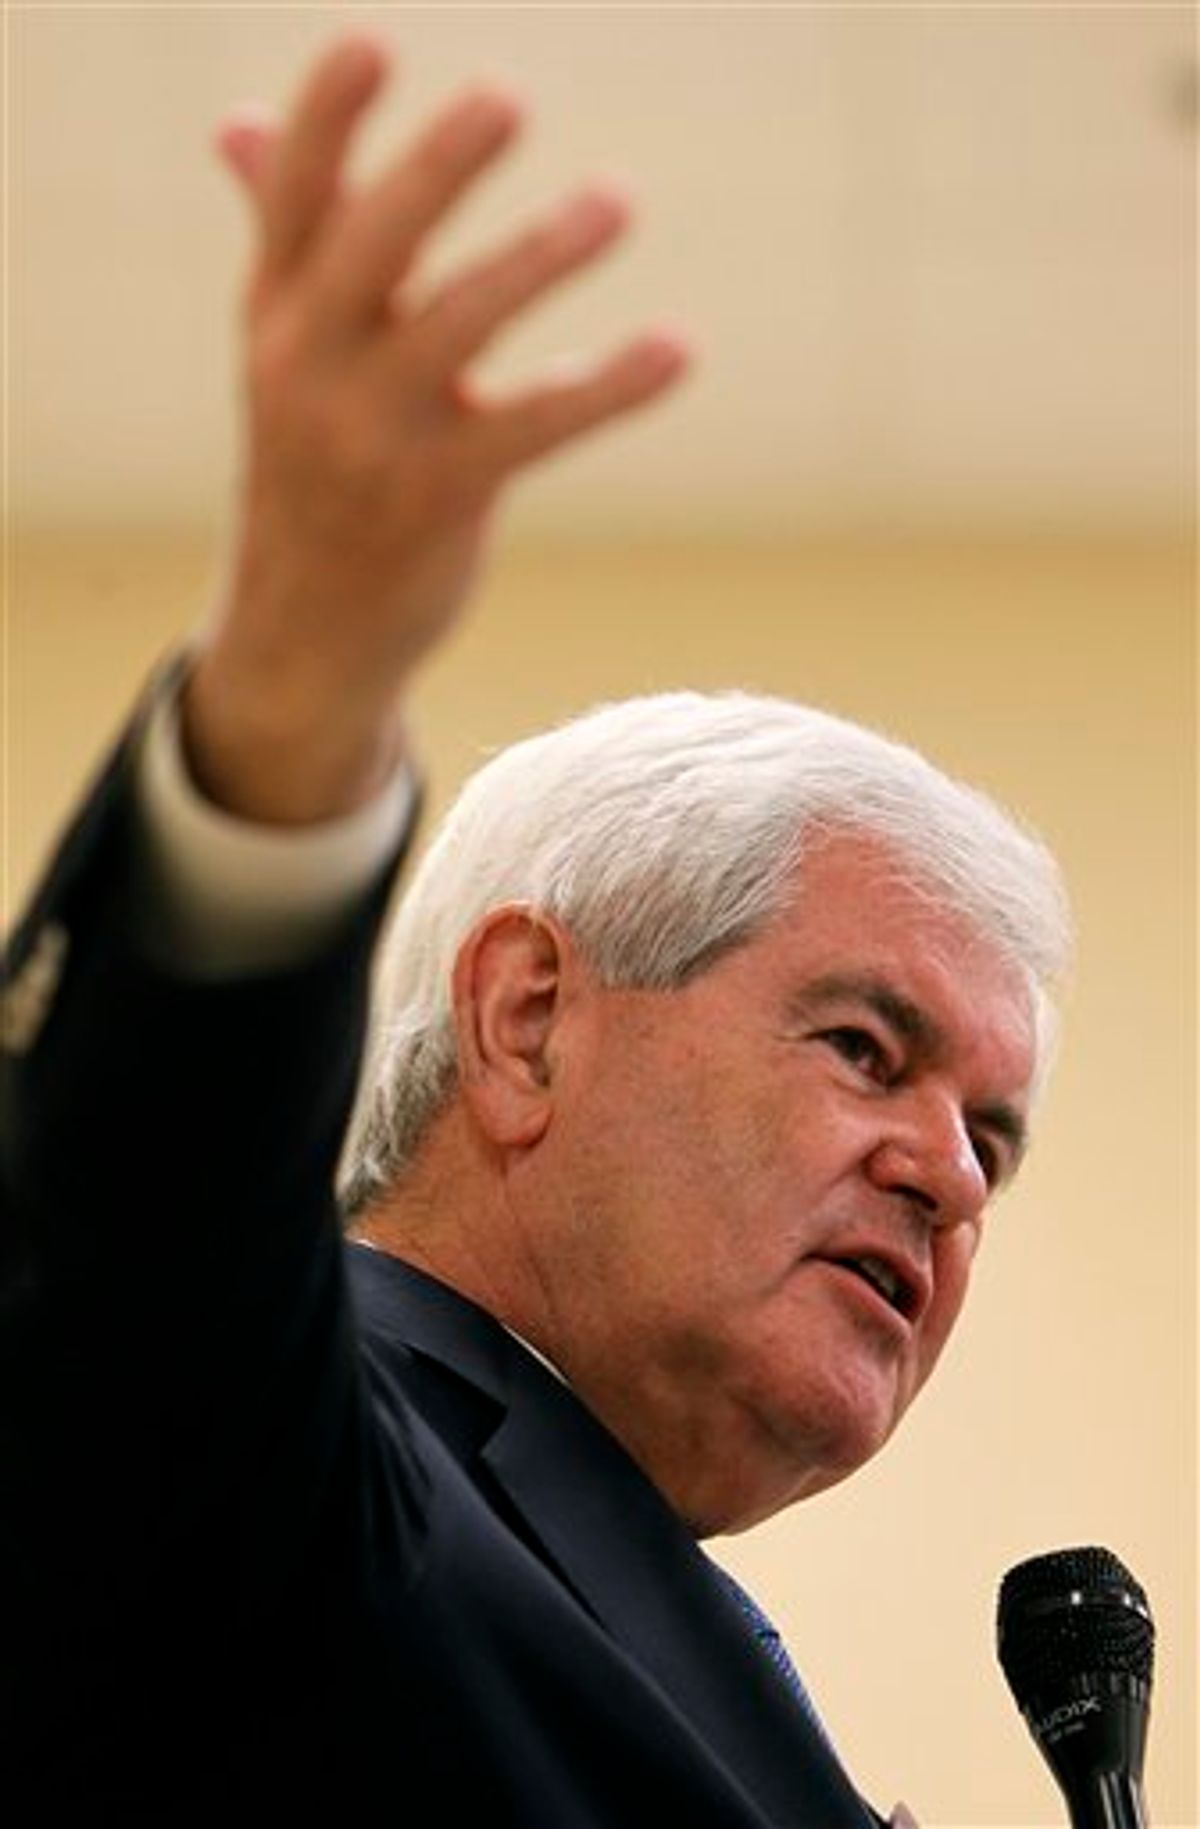 Former U.S. Speaker of the House Newt Gingrich speaks during a fundraising breakfast for Iowa Congressional candidate Brad Zaun, Monday, July 12, 2010, in Des Moines, Iowa. (AP Photo/Charlie Neibergall) (AP)